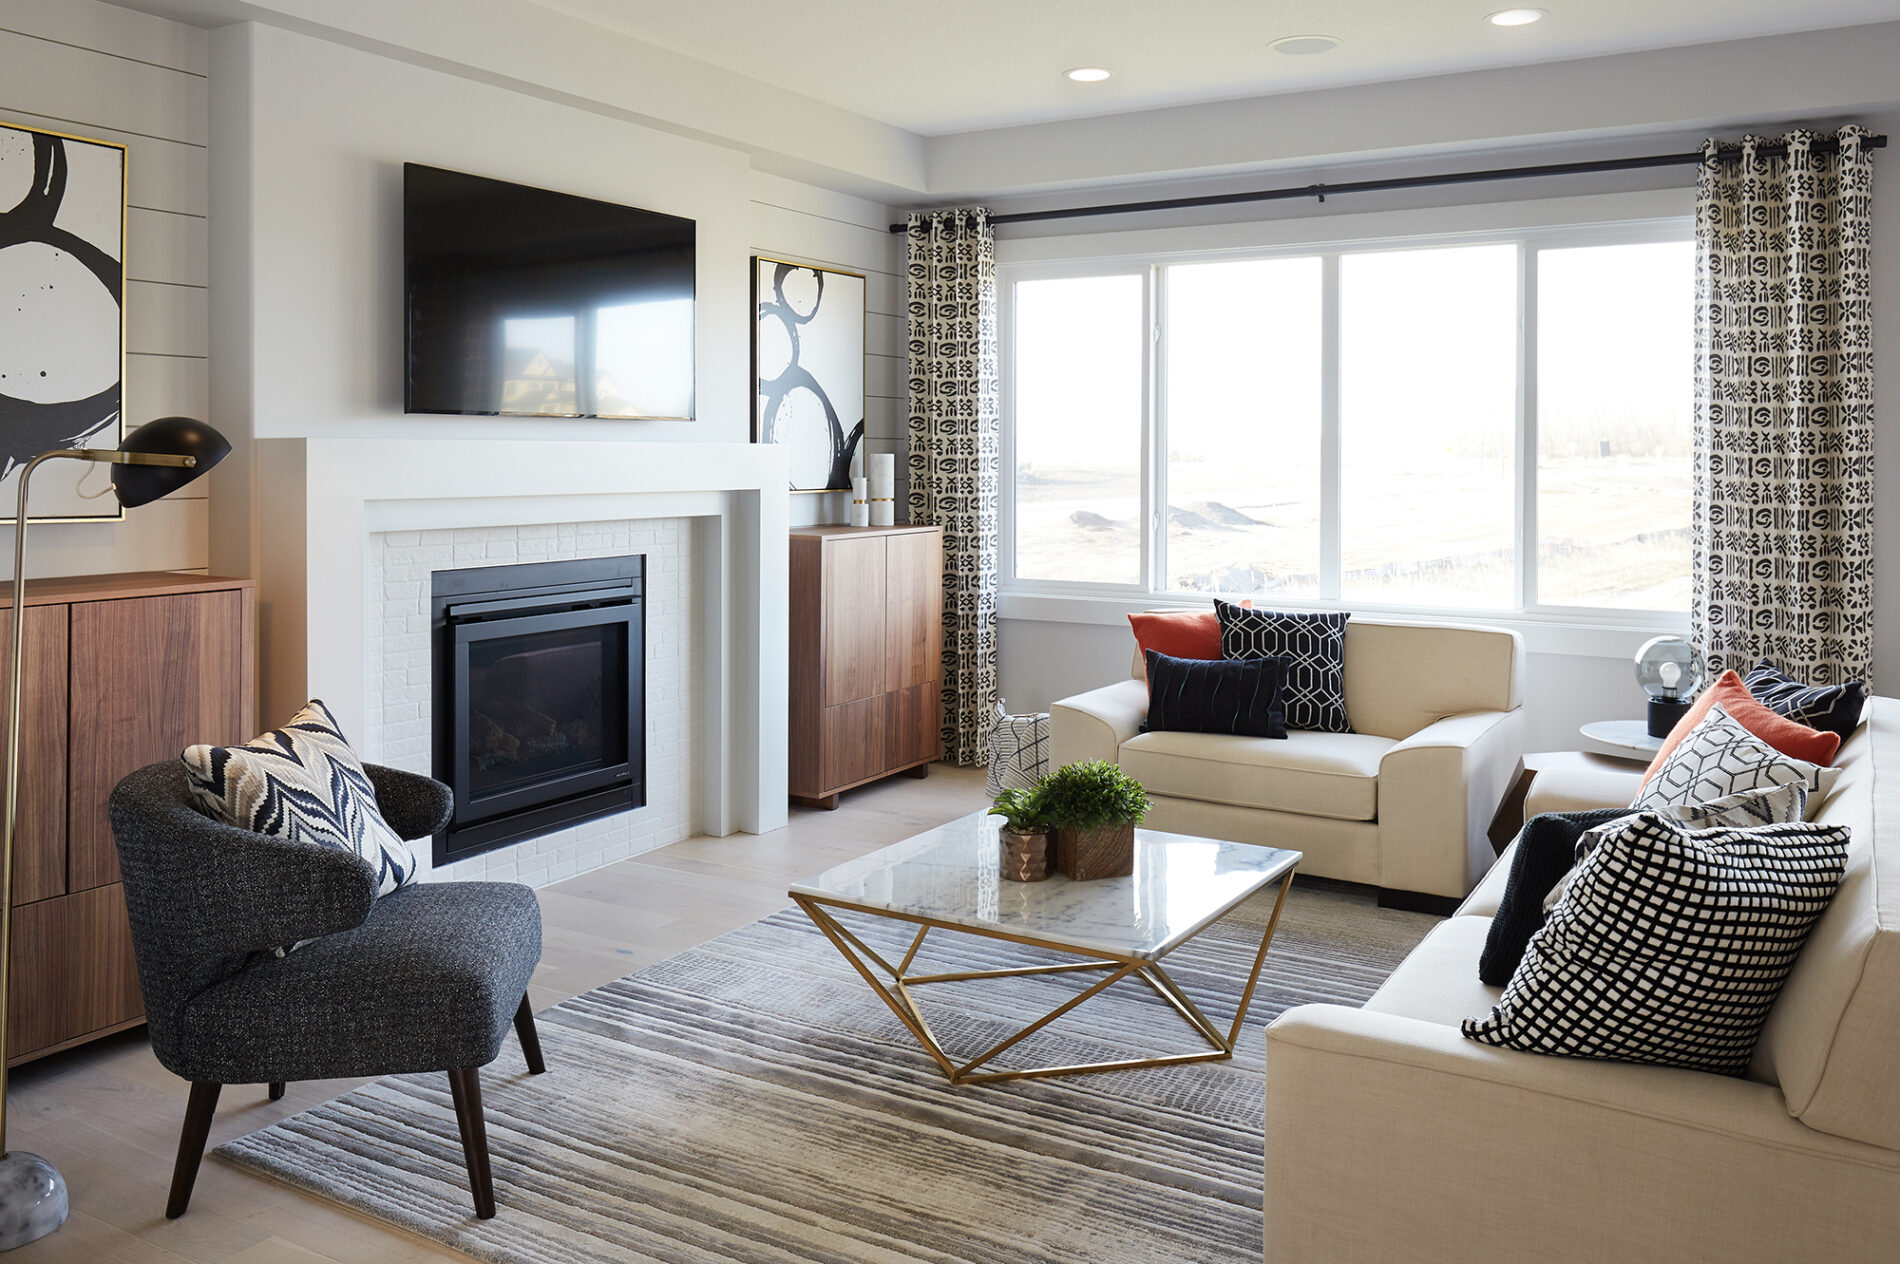 Bright great room centered around the contemporary fireplace with white brick tile and simple tiered surround, with shiplap detail on walls flanking the fireplace